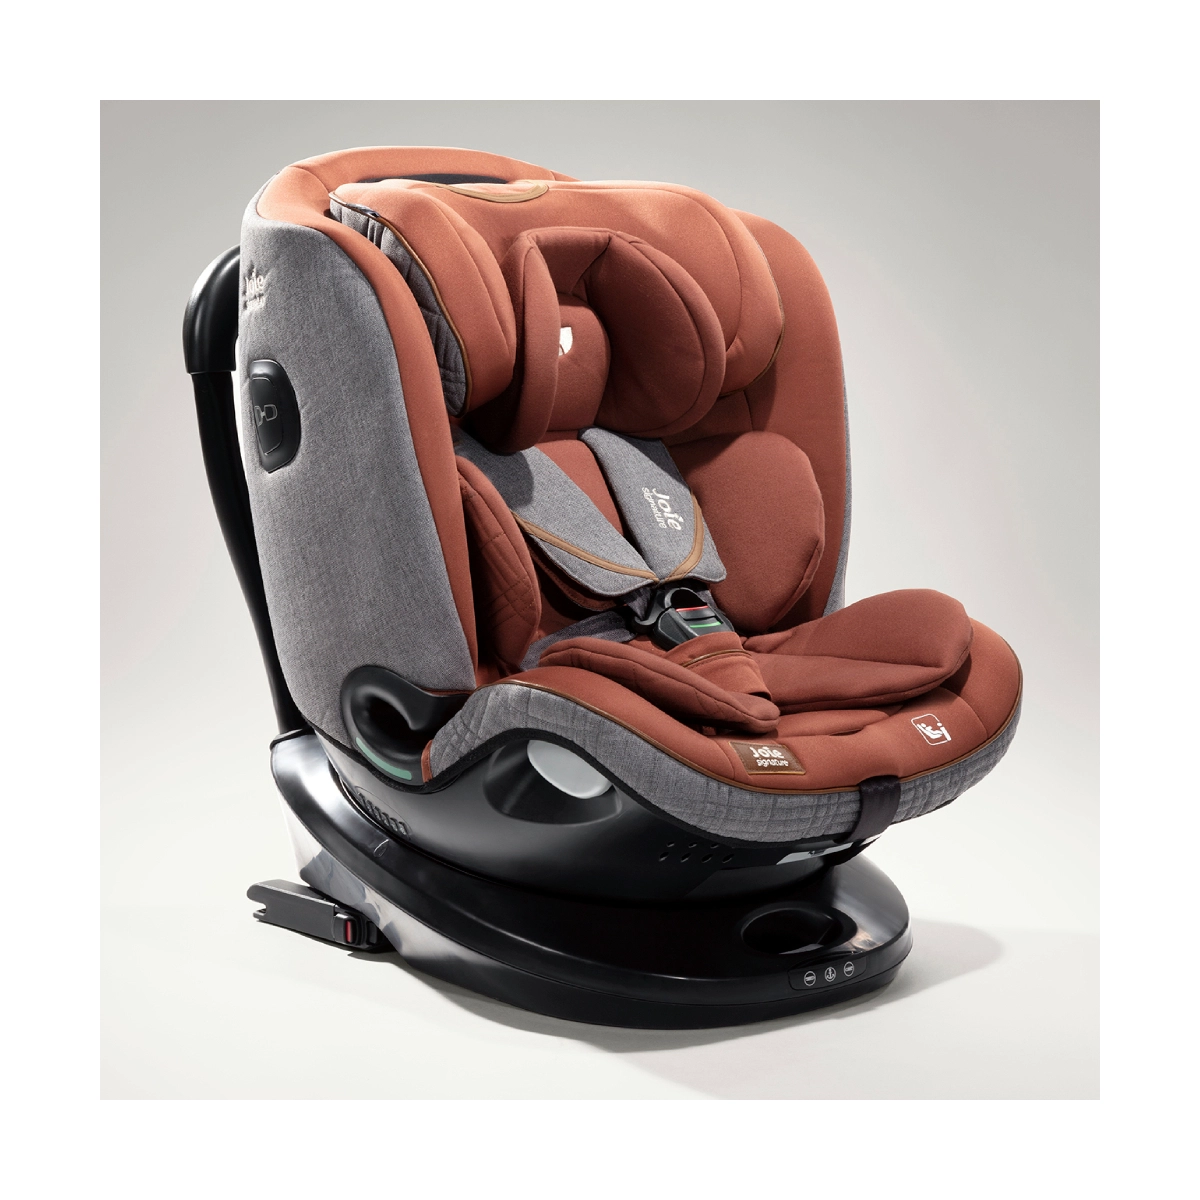 Joie i-Spin Grow Signature Car Seat